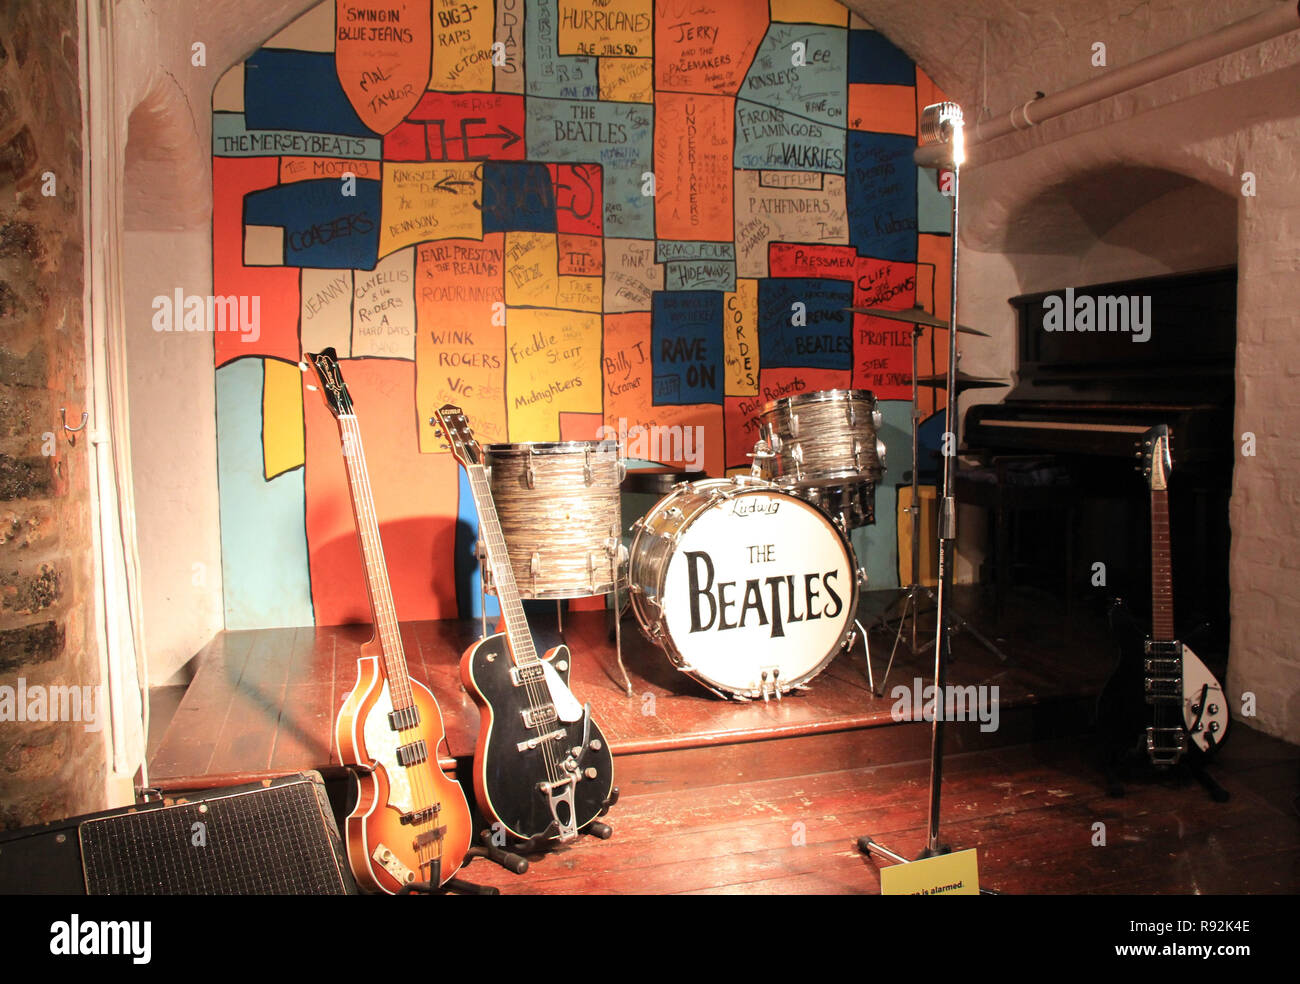 Liverpool, UK. 30th Nov, 2018. Reproduction of the small stage in the Cavern Club, where the Beatles played in the early 1960s. The replica can be seen in the exhibition 'The Beatles Story' in Liverpool. Liverpool also celebrates its famous sons in 2019. (to dpa 'Liverpool in the Beatles intoxication - Anniversary celebrations also 2019' from 19.12.2018) Credit: Silvia Kusidlo/dpa/Alamy Live News Stock Photo